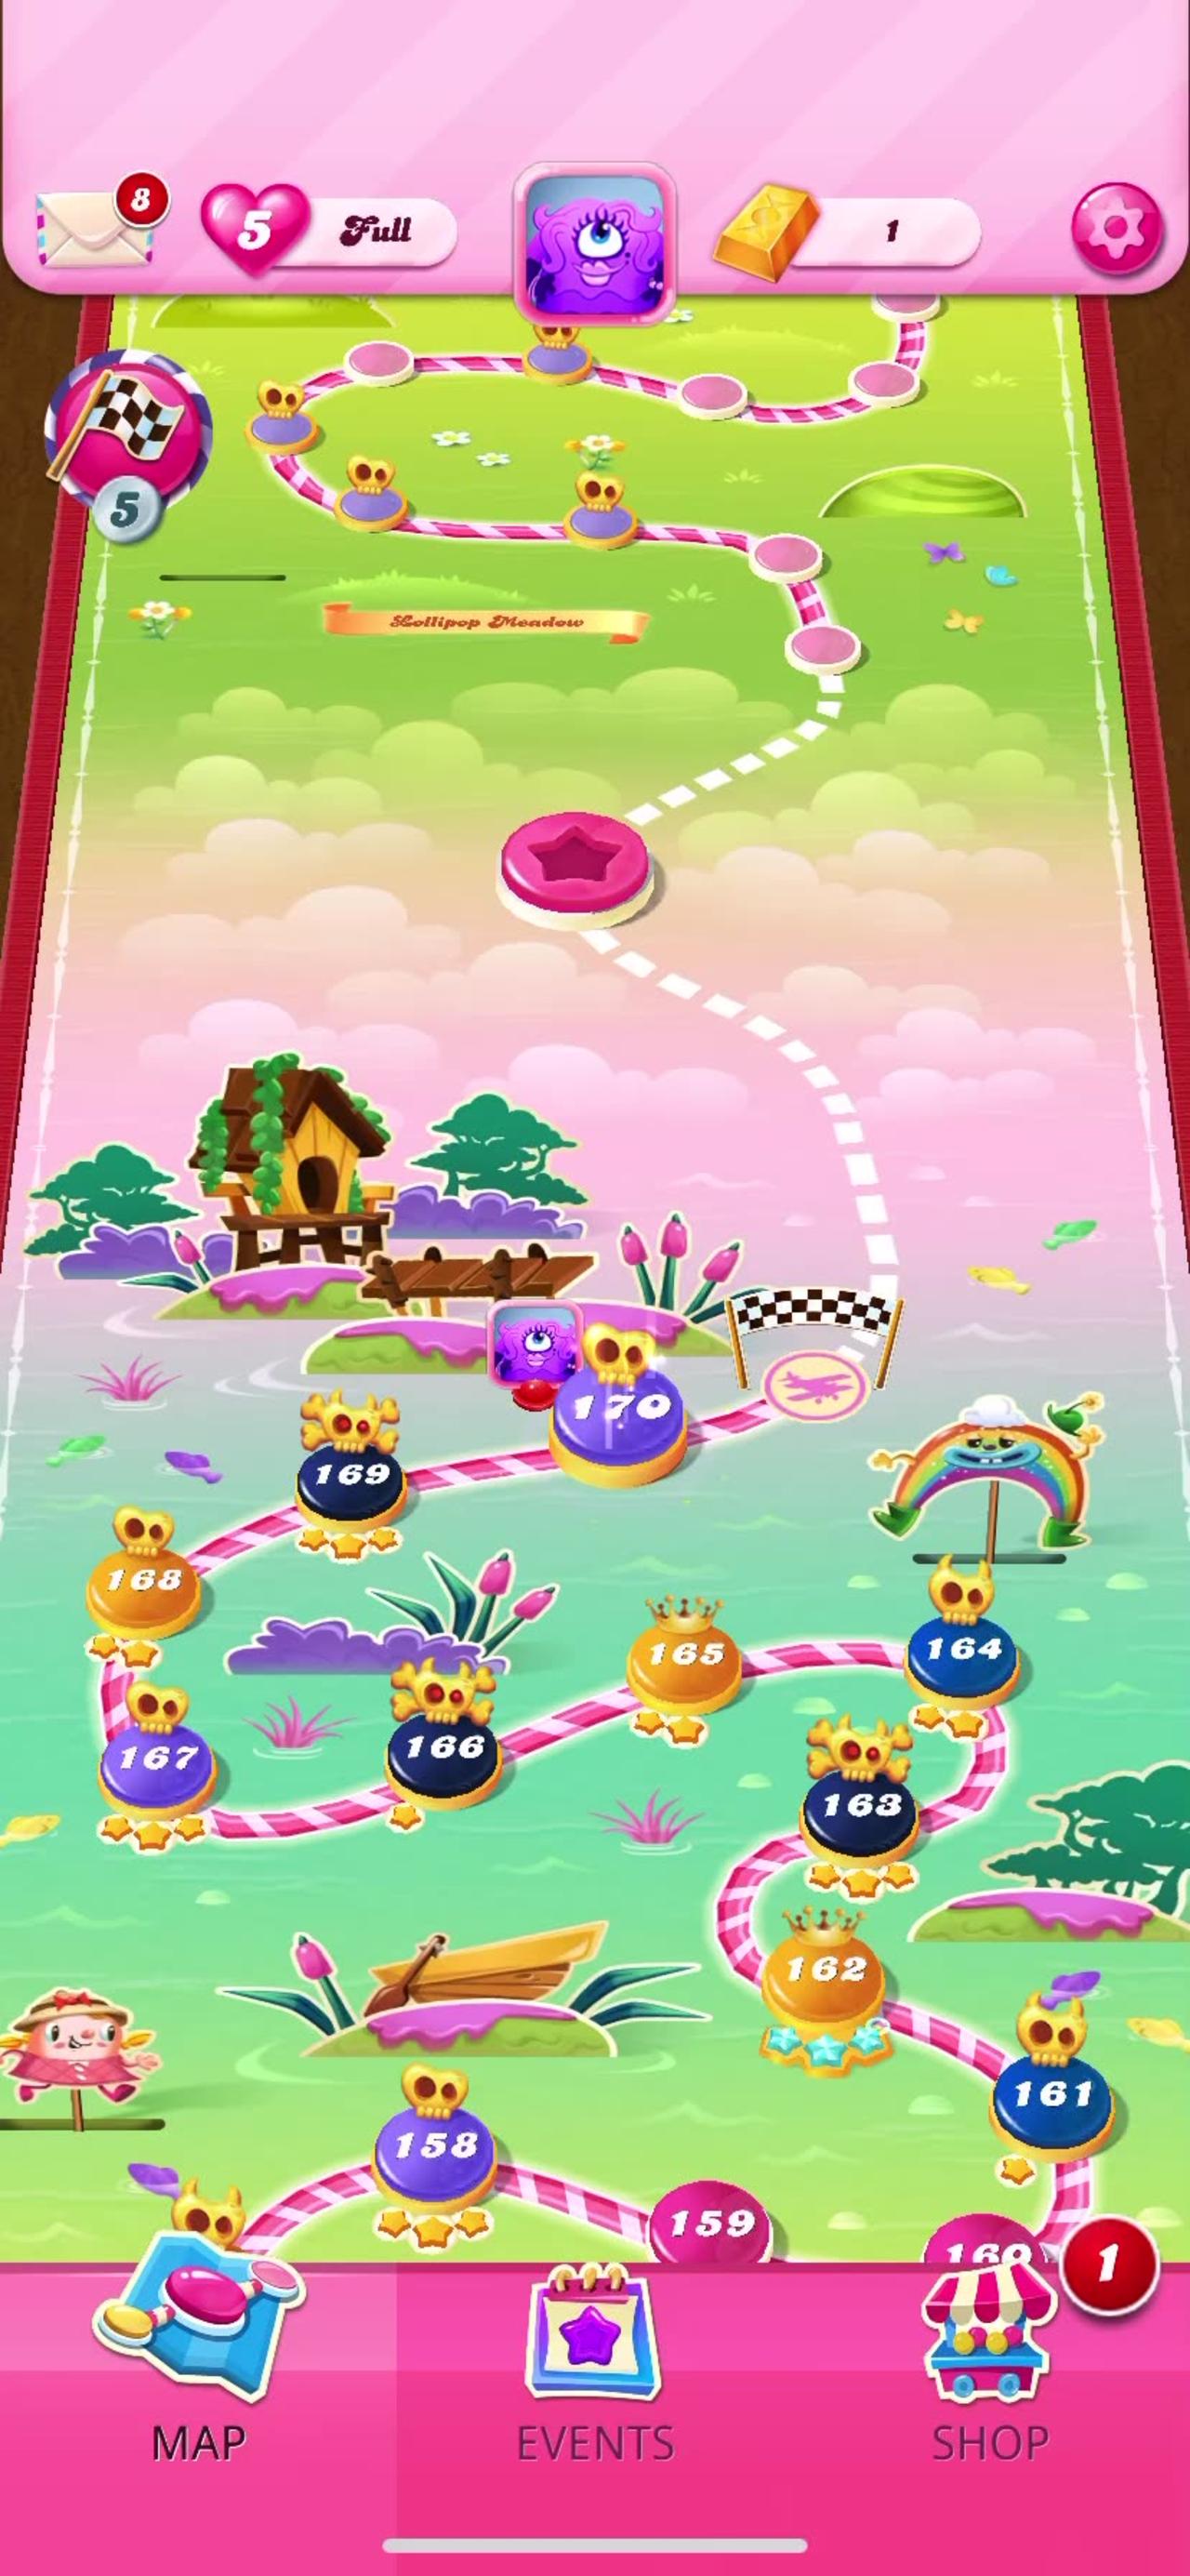 Candy Crush Saga Level 170 #subscribe #shorts #trending #viral #candy #subscribetomychannel